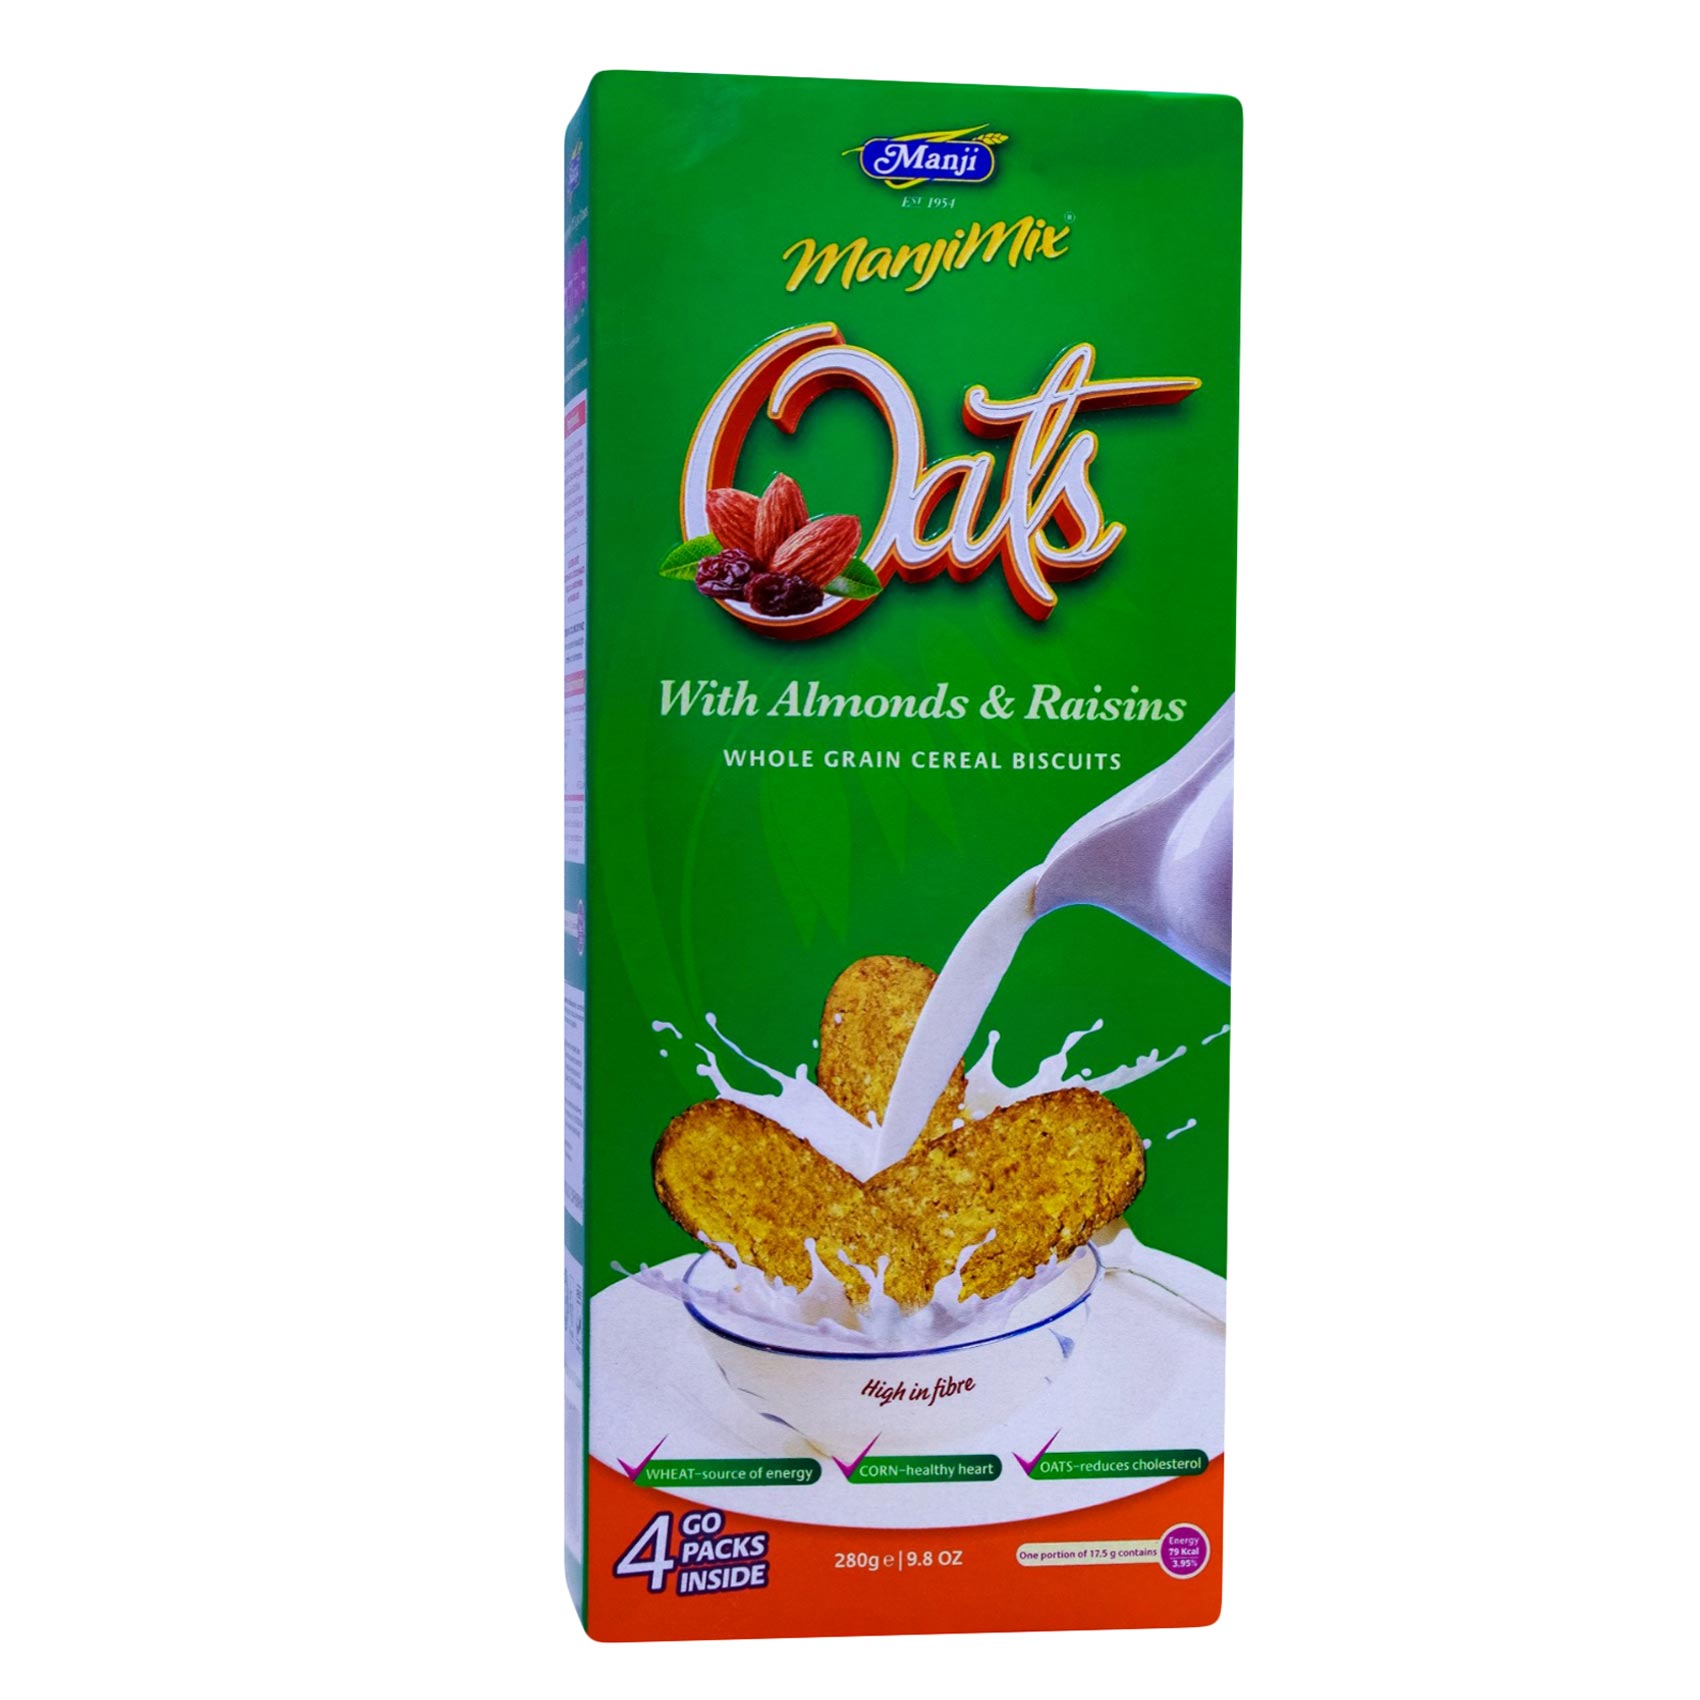 Manji Manjimix Oats With Almonds And Raisins Whole Grain Cereal Biscuits 280g